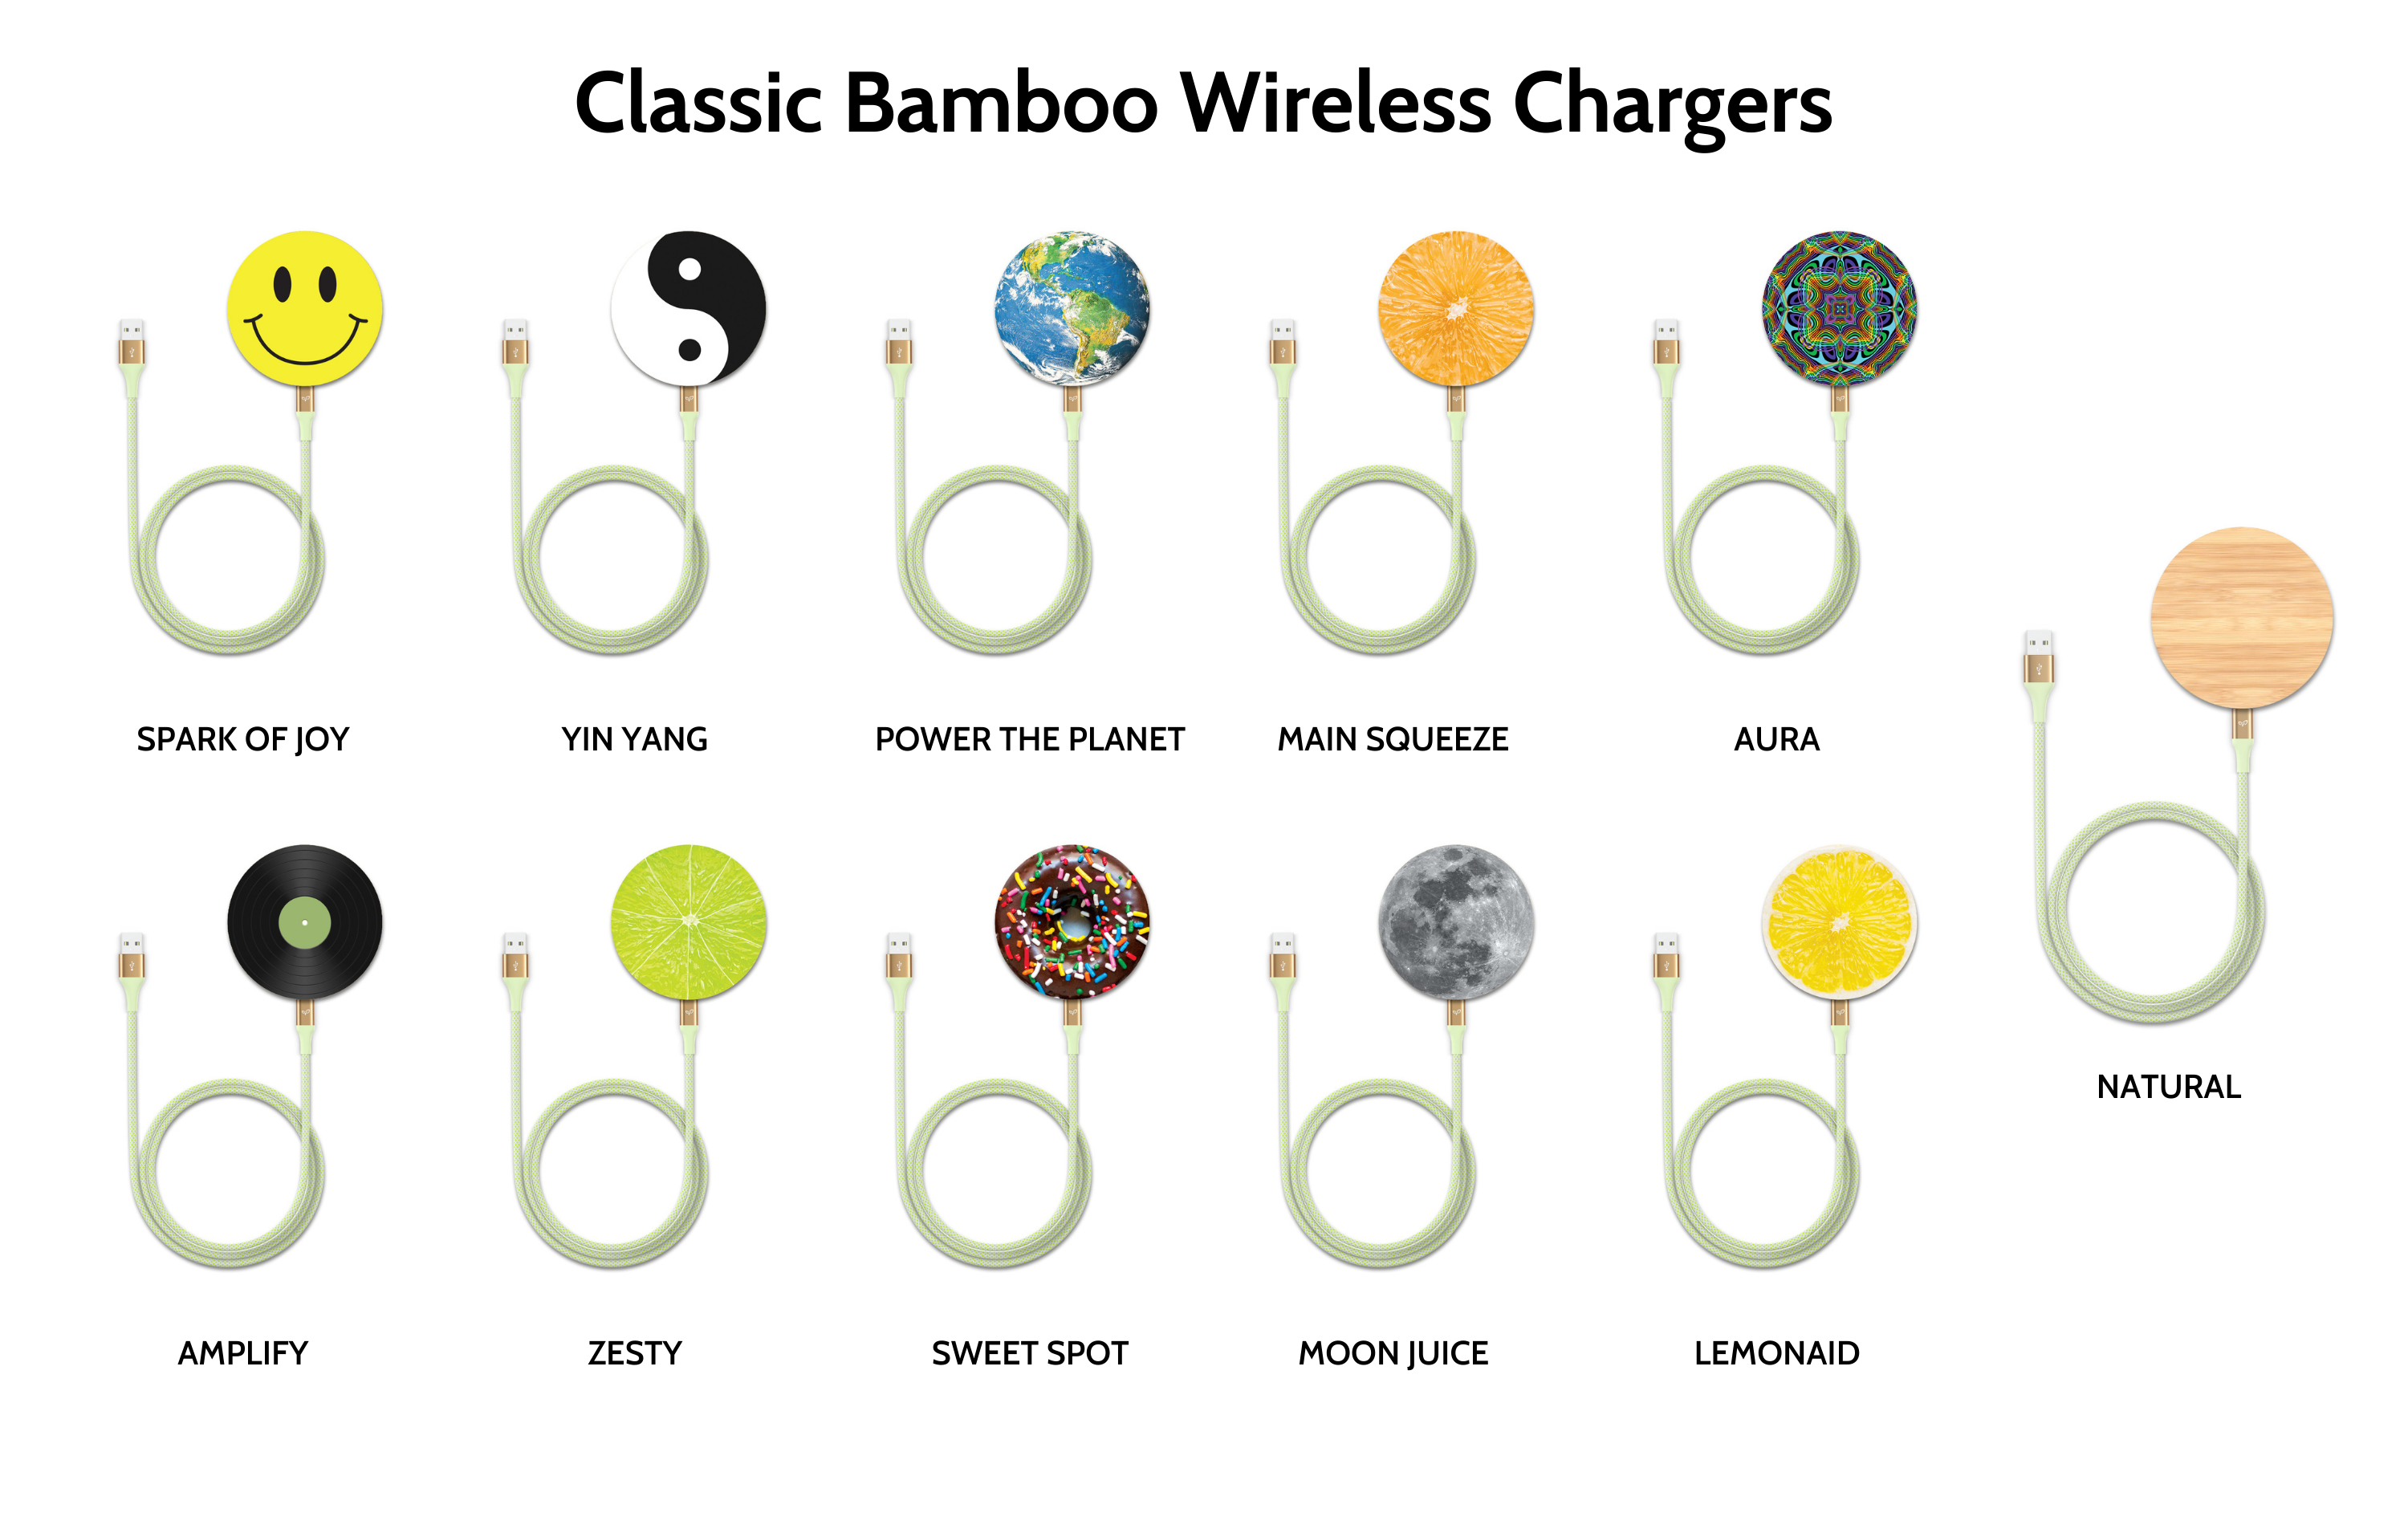 Bamboo Wireless Chargers - 10 Classic Designs